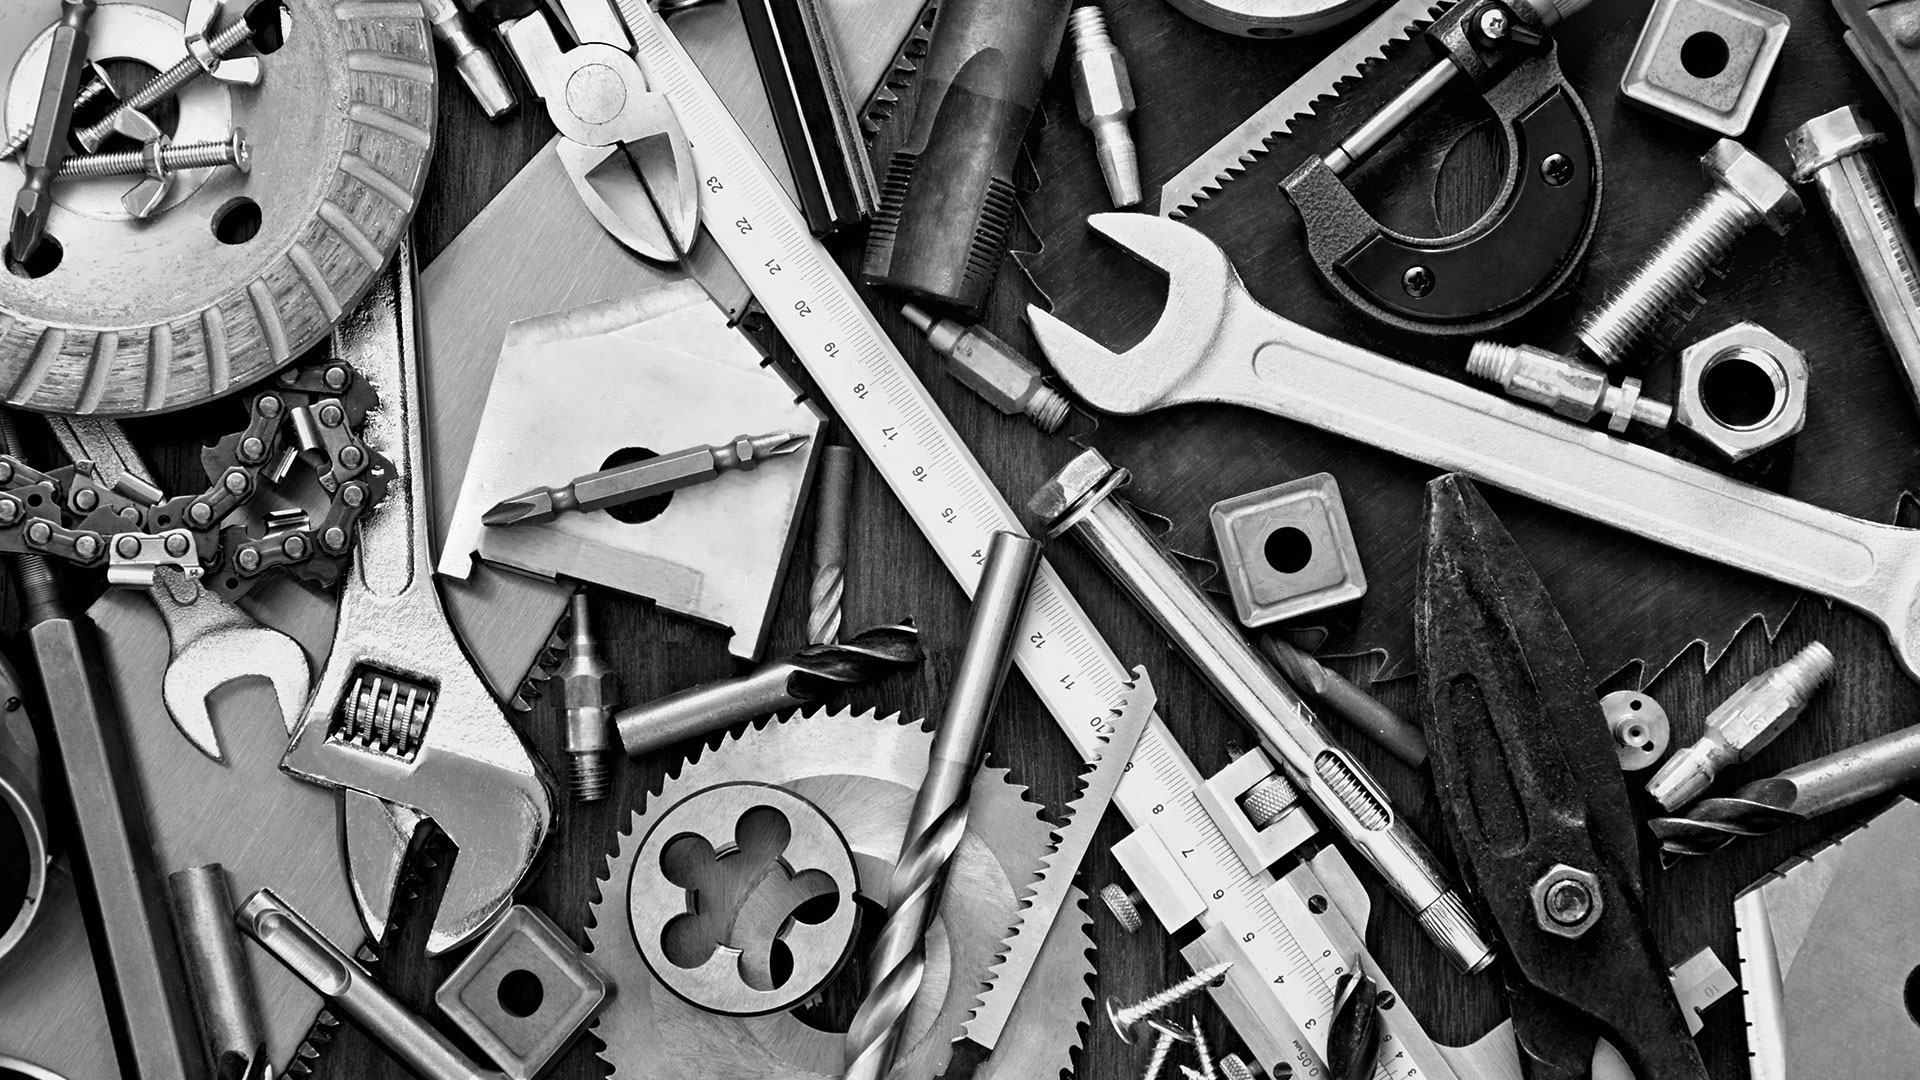 Black And White Tools, Displayed All Over The Screen - Black And White Tools - HD Wallpaper 